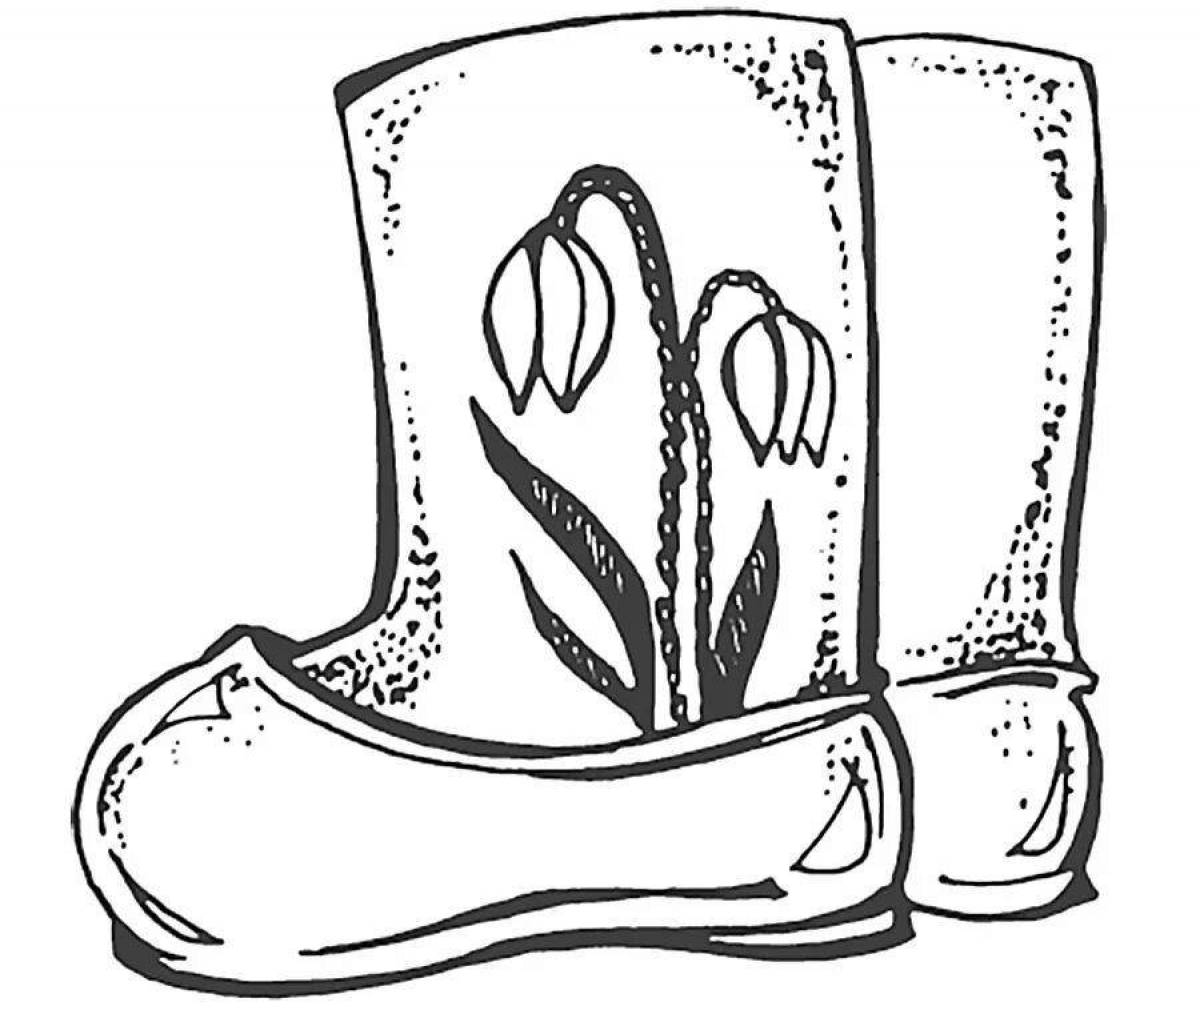 Coloring page dazzling boots